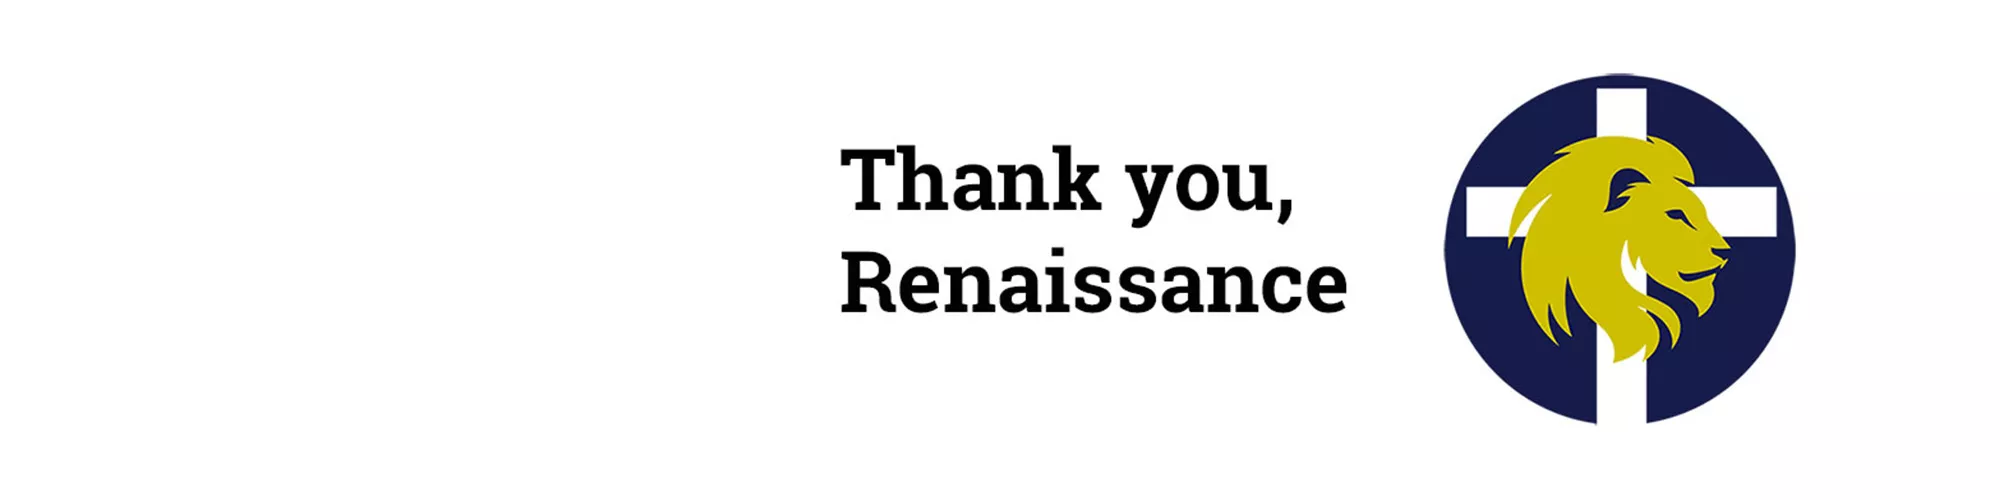 Hero image for the Thank you, Renaissance page